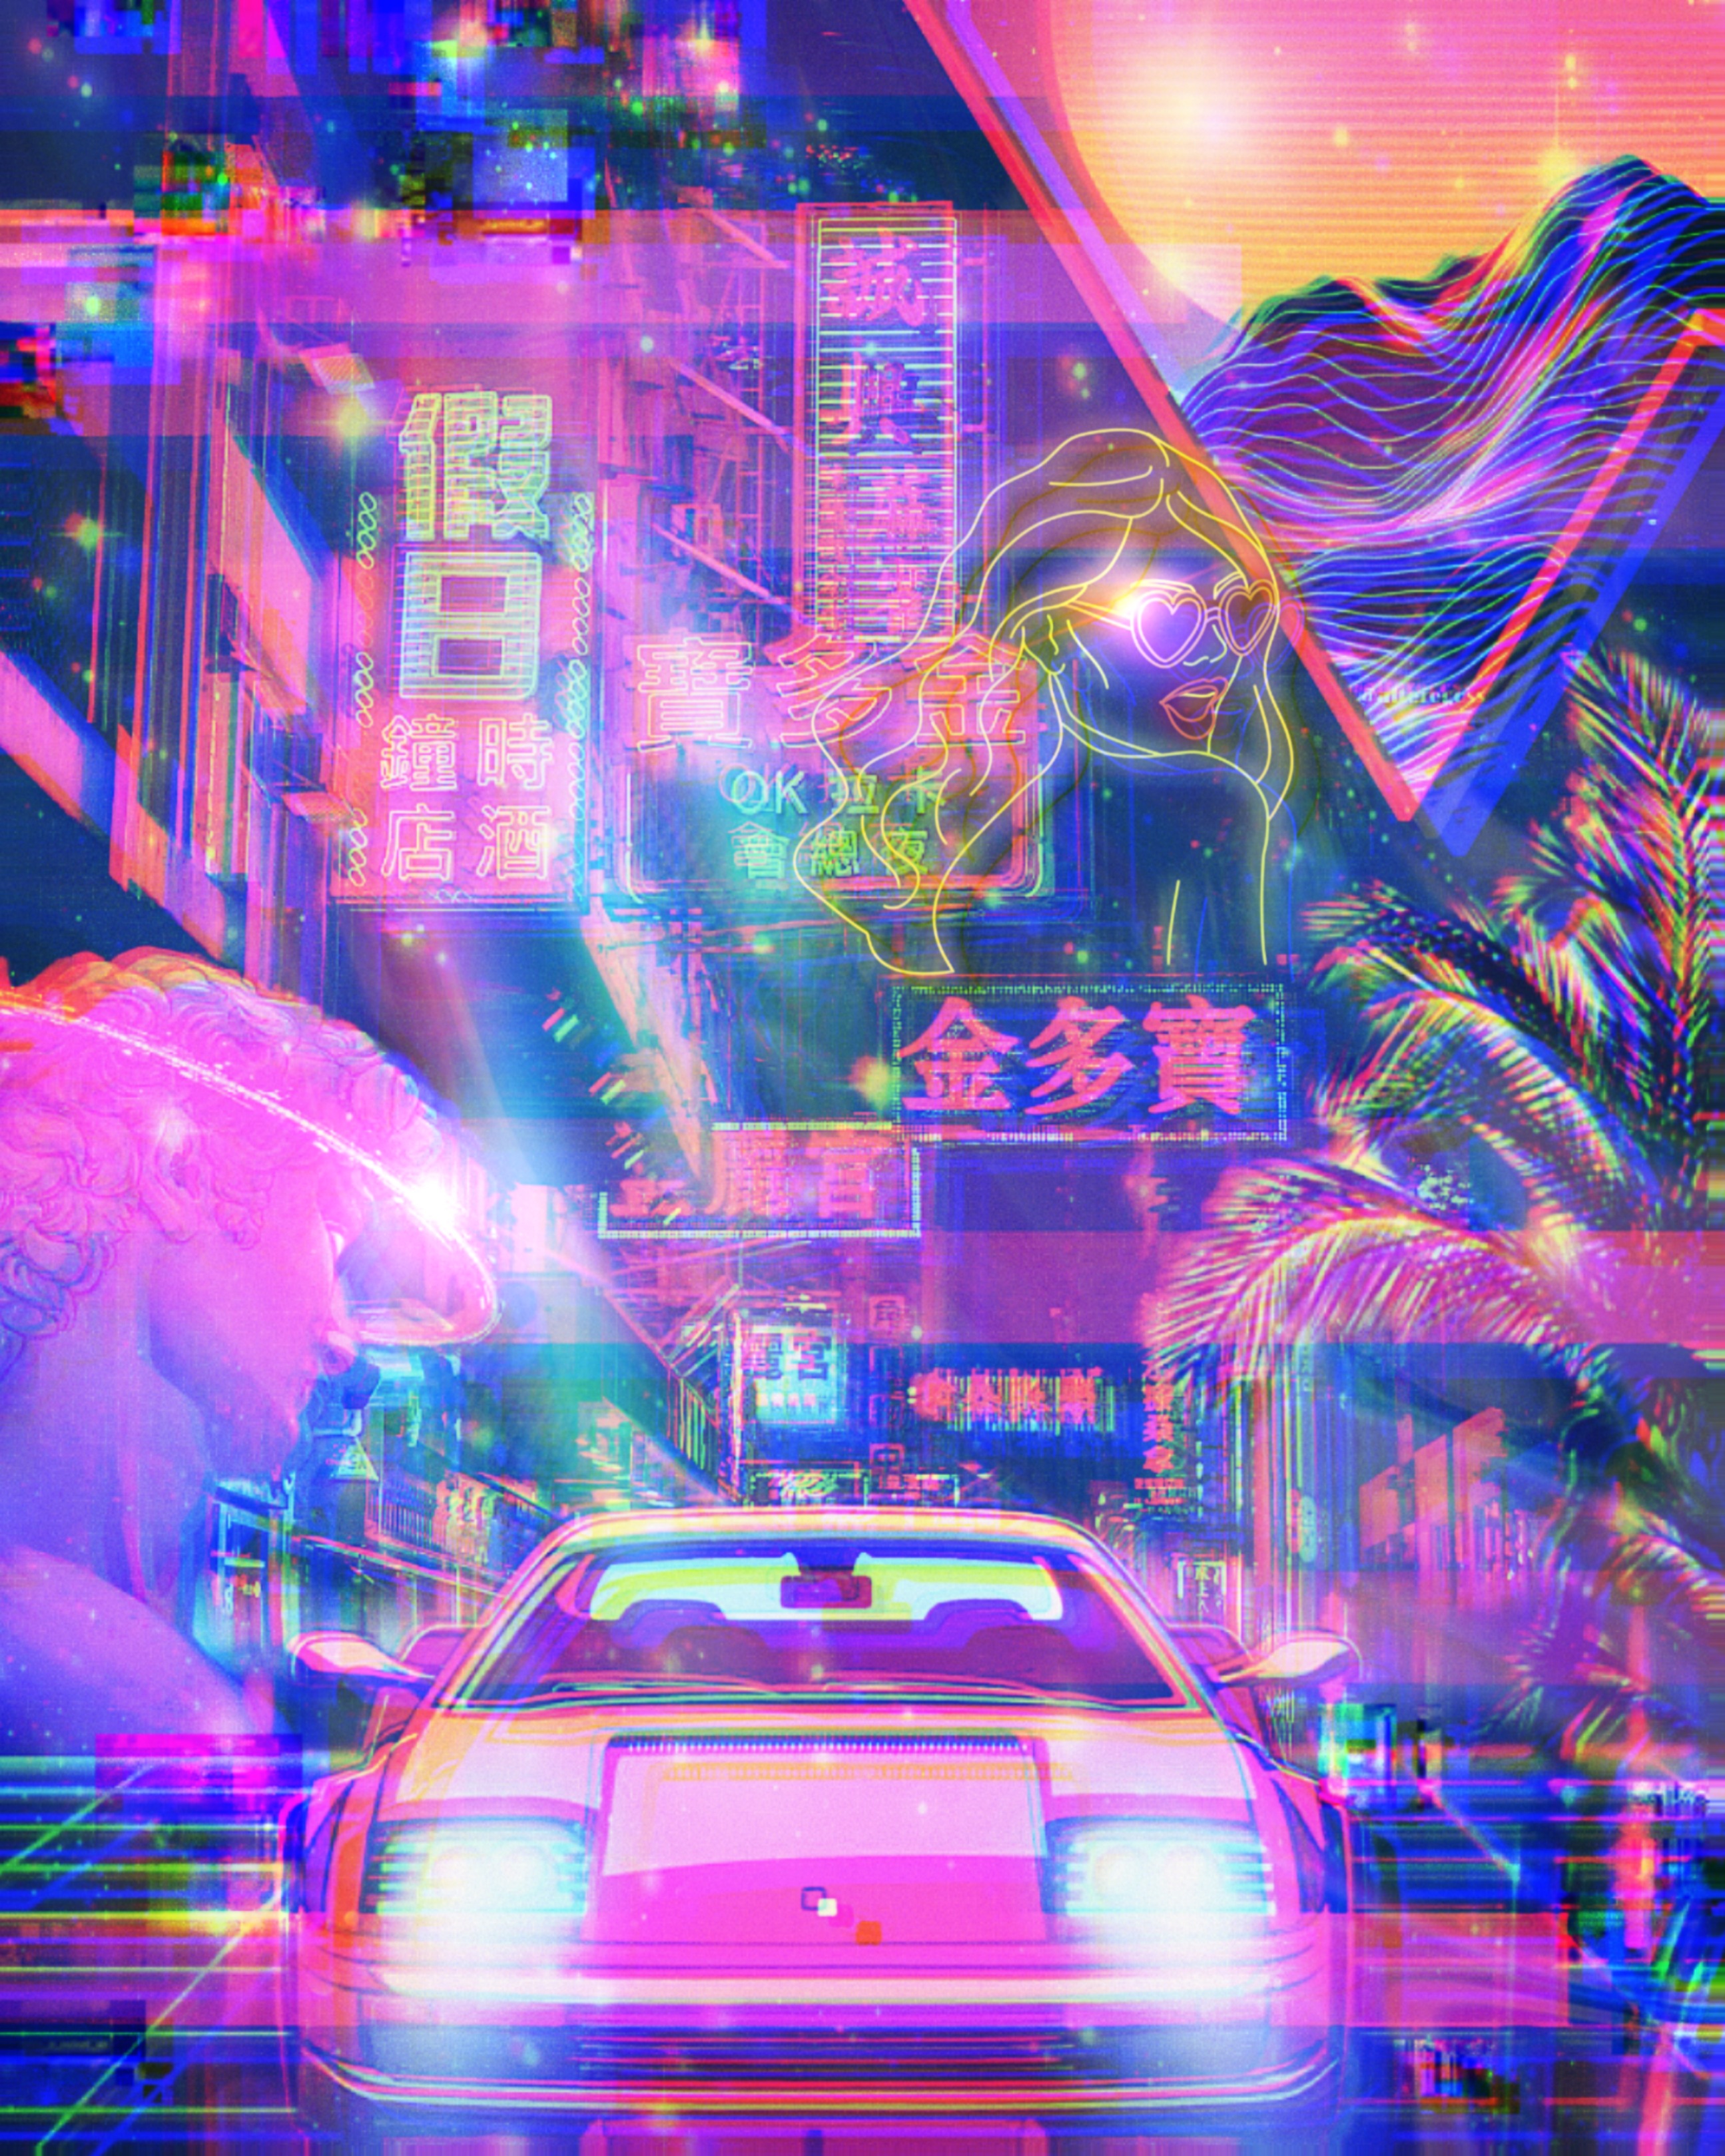 retrowave music My Retro80s Style Image by victor2368